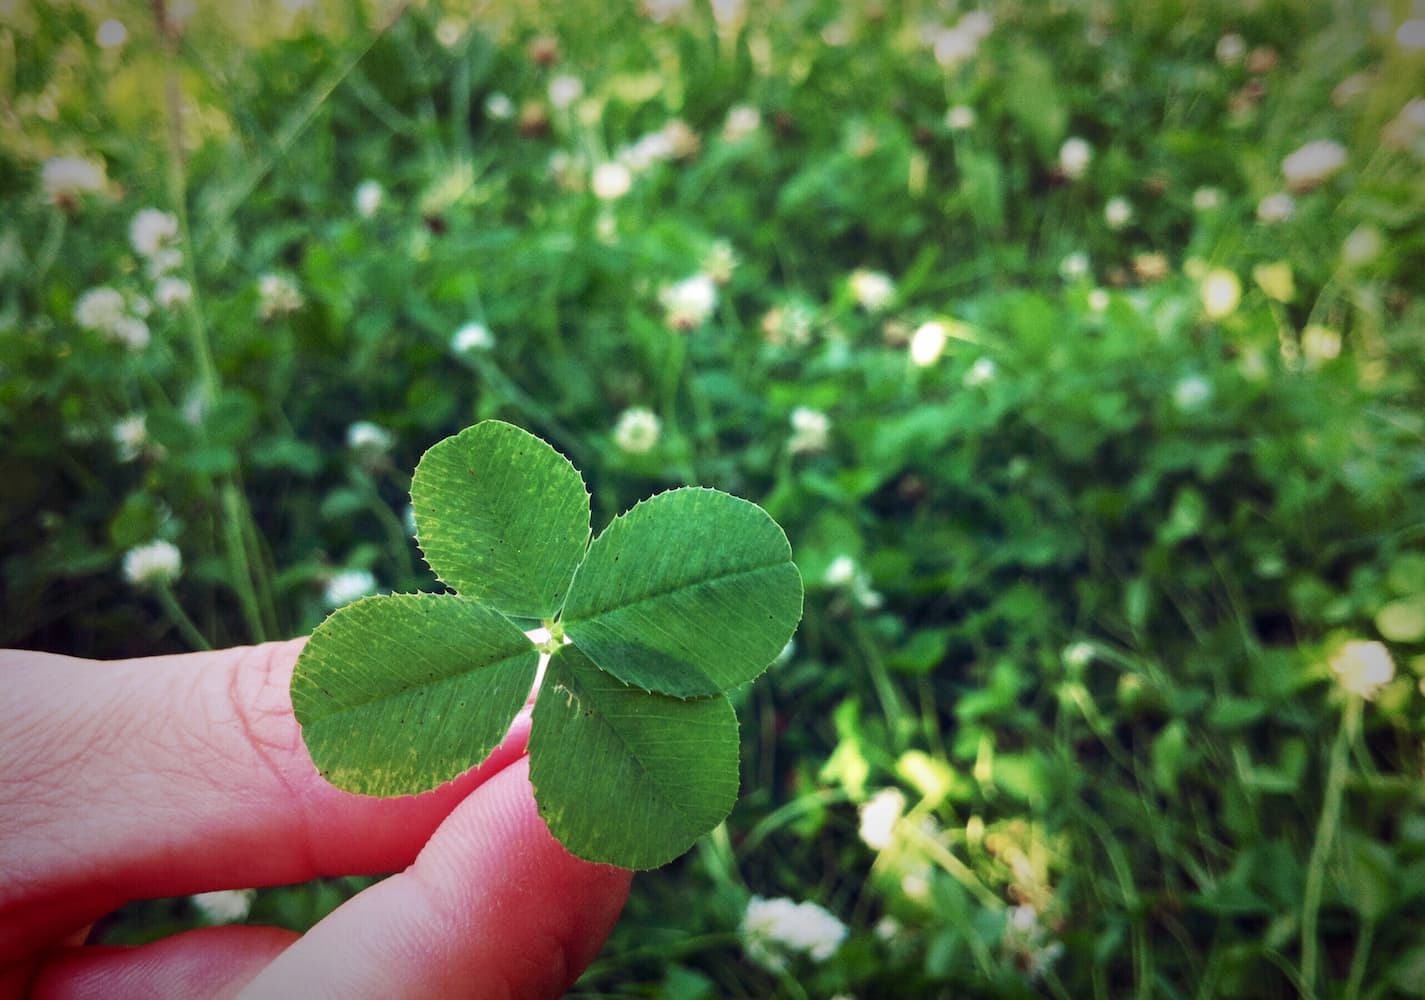 image of clovers